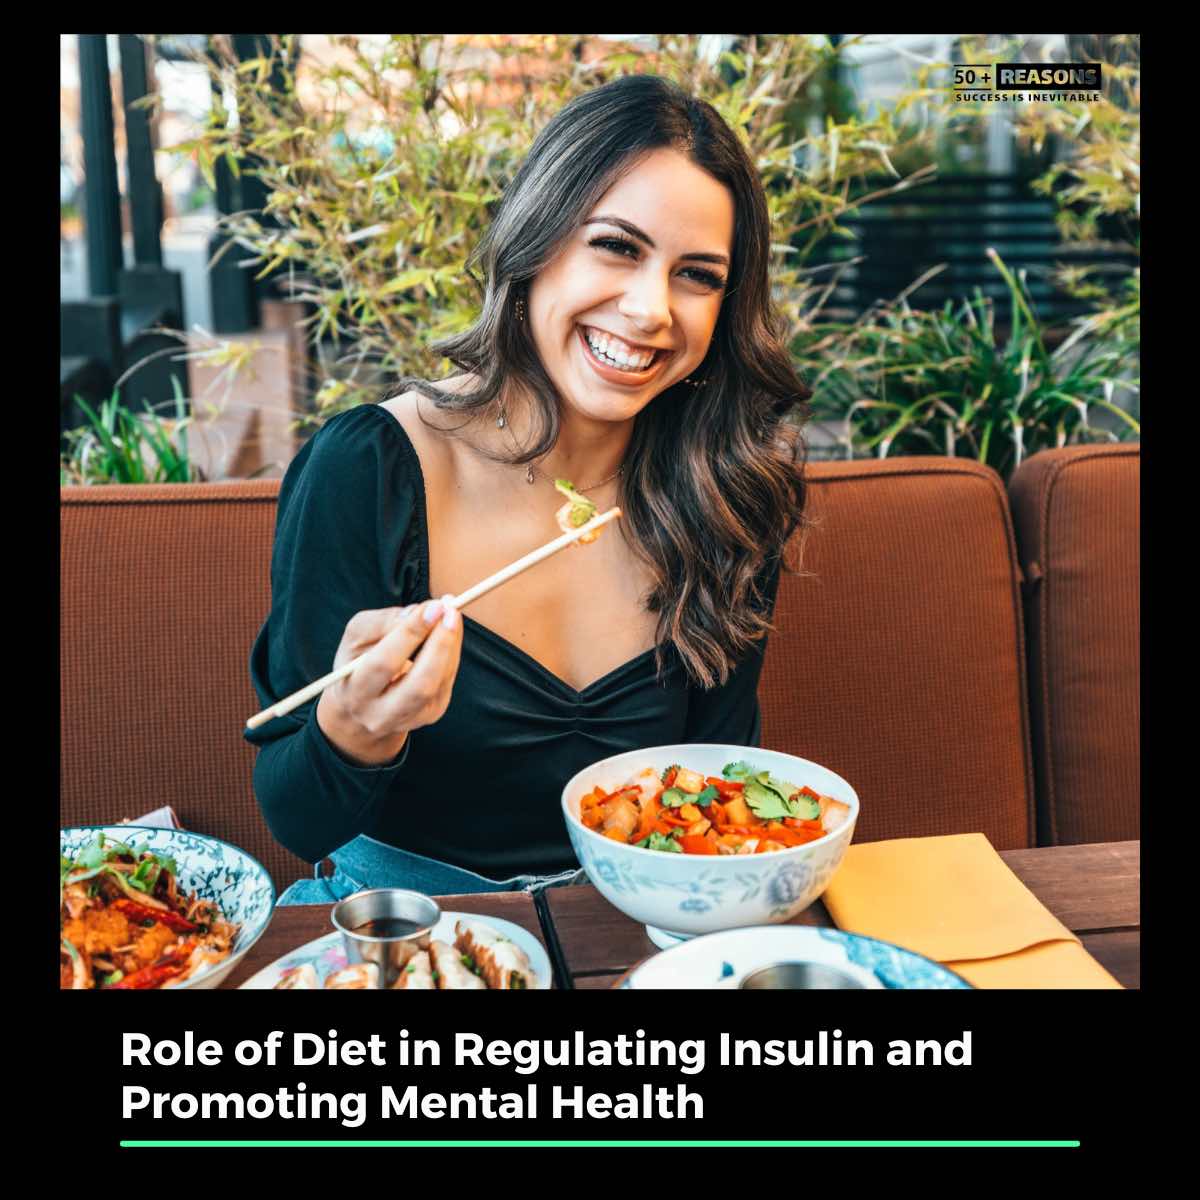 Role of Diet in Regulating Insulin and Promoting Mental Health